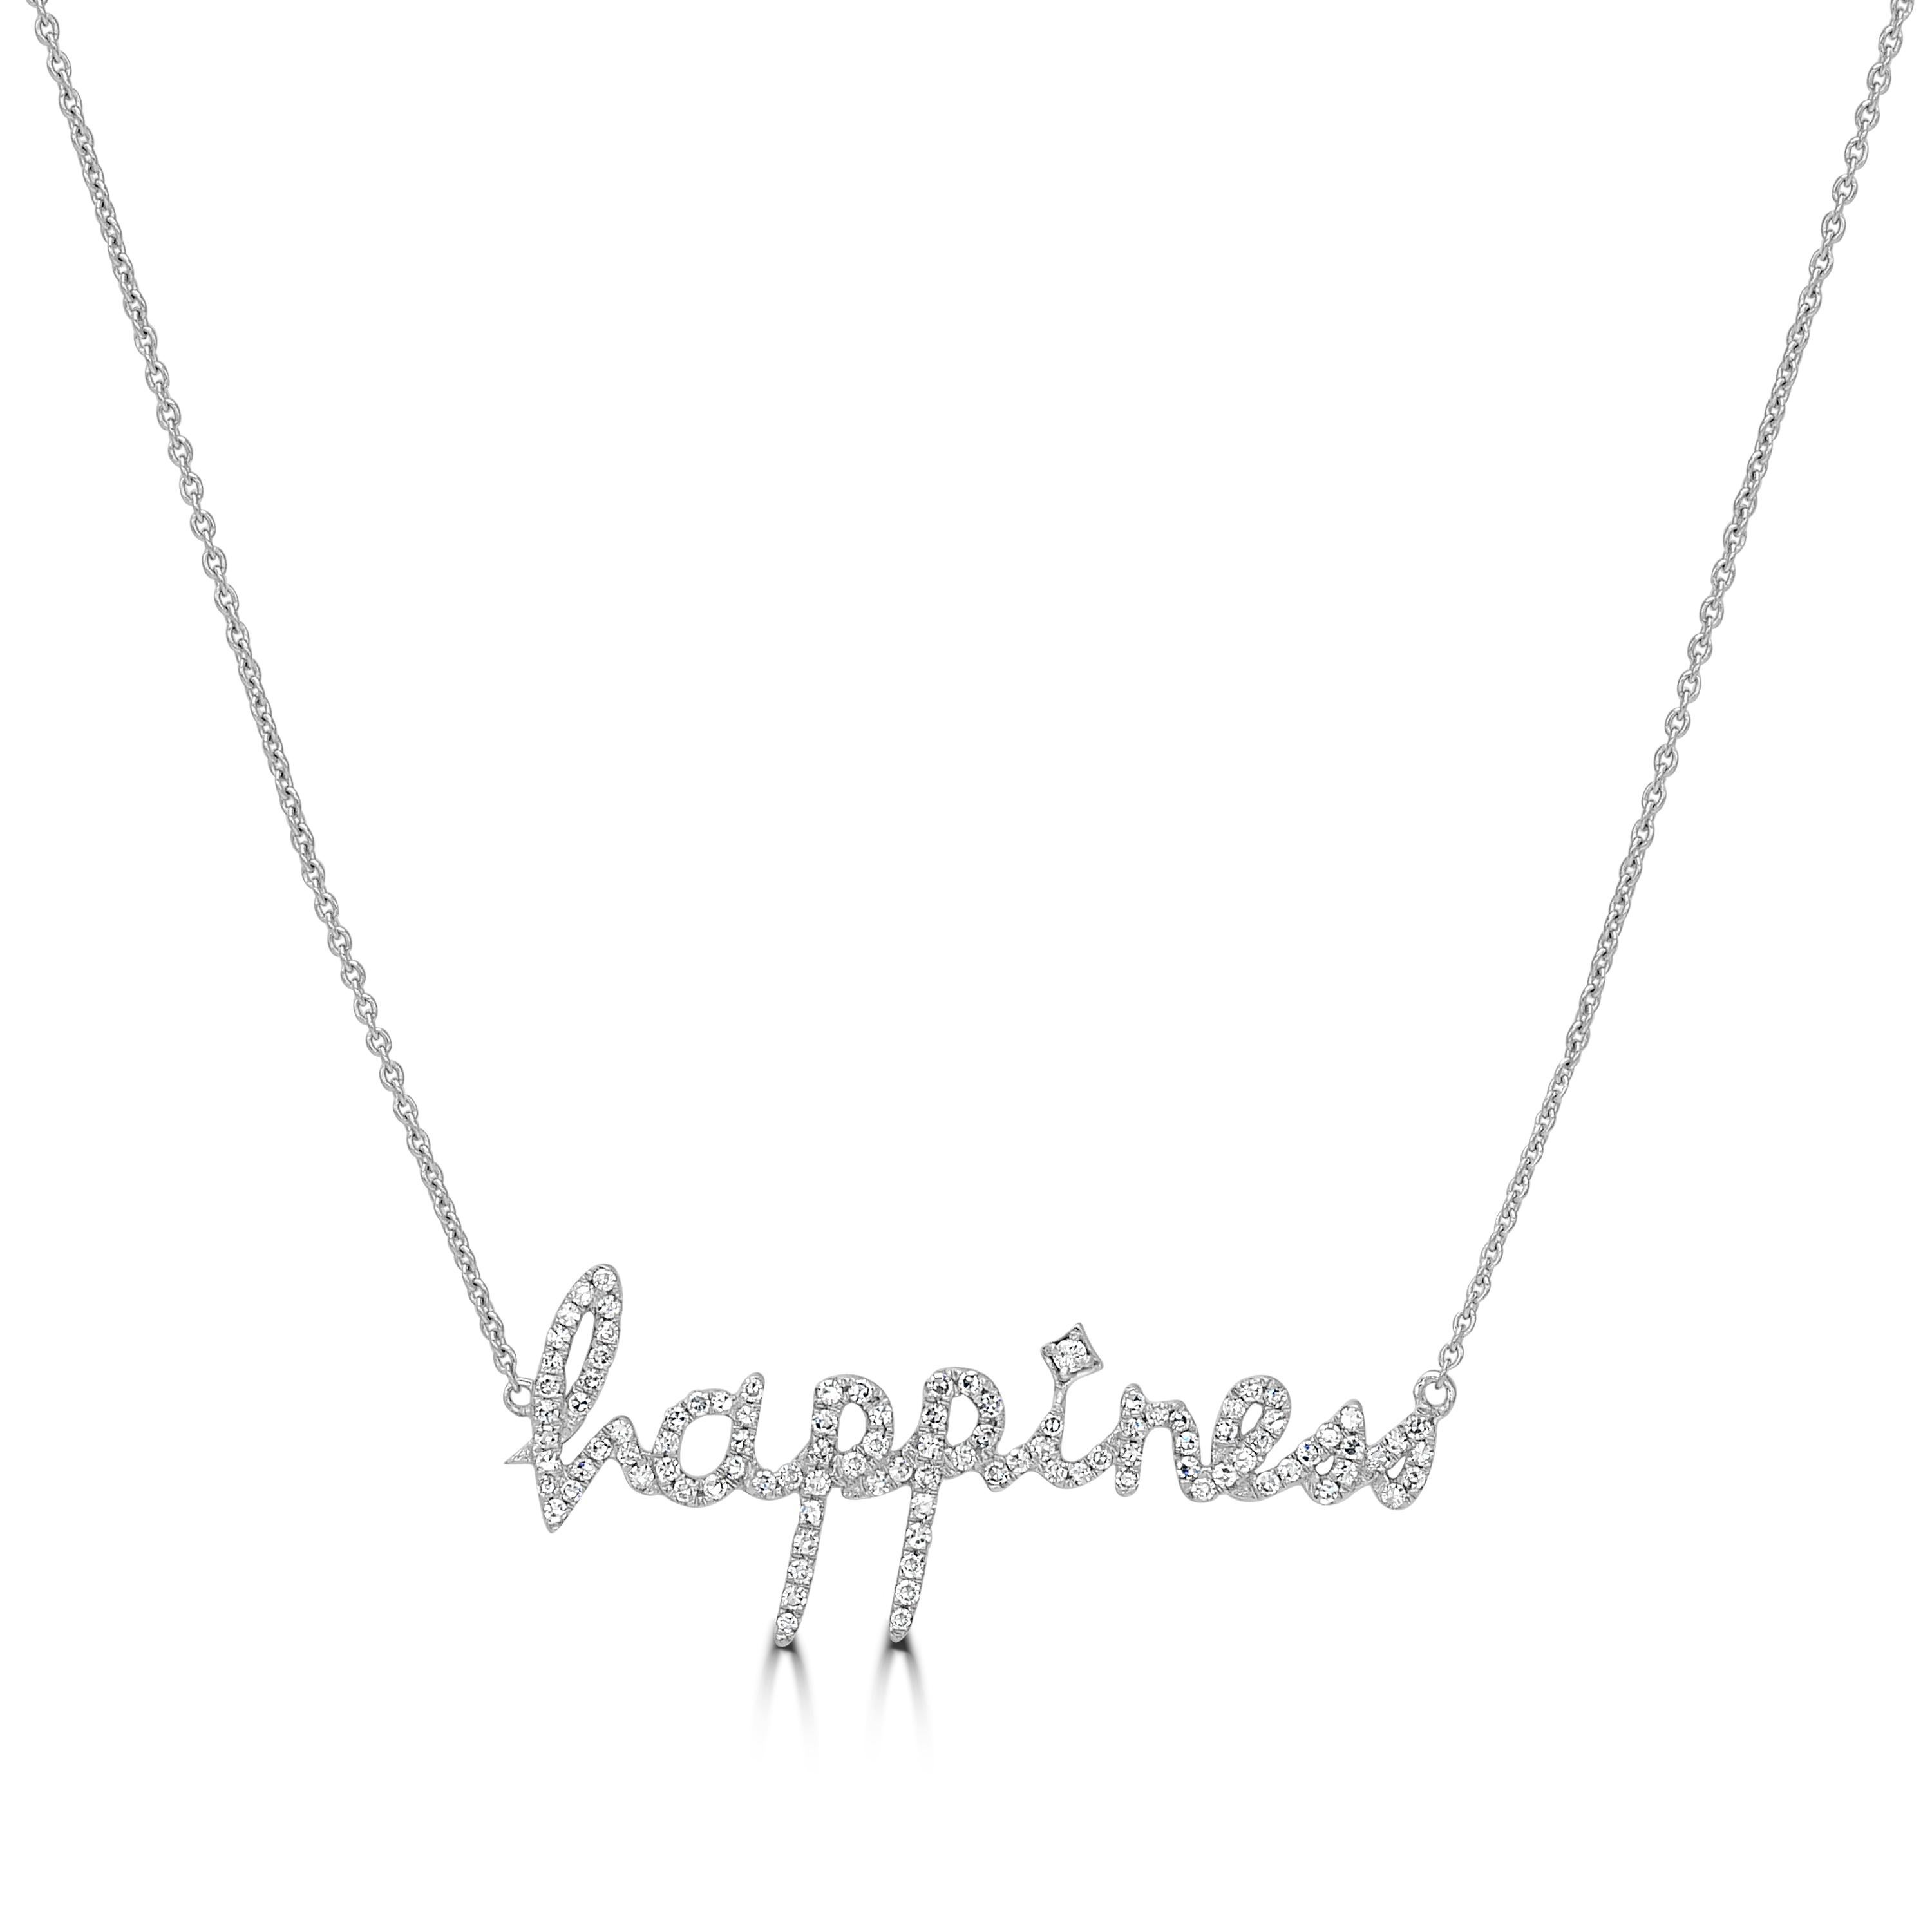 Inspire happiness wherever you go when you wear this Luxle 14k gold diamond necklace. This pendant necklace is made of 14K White Gold and comes with rolo gold chain. It is set with 0.30 carats of round full-cut and single-cut diamonds.

Please